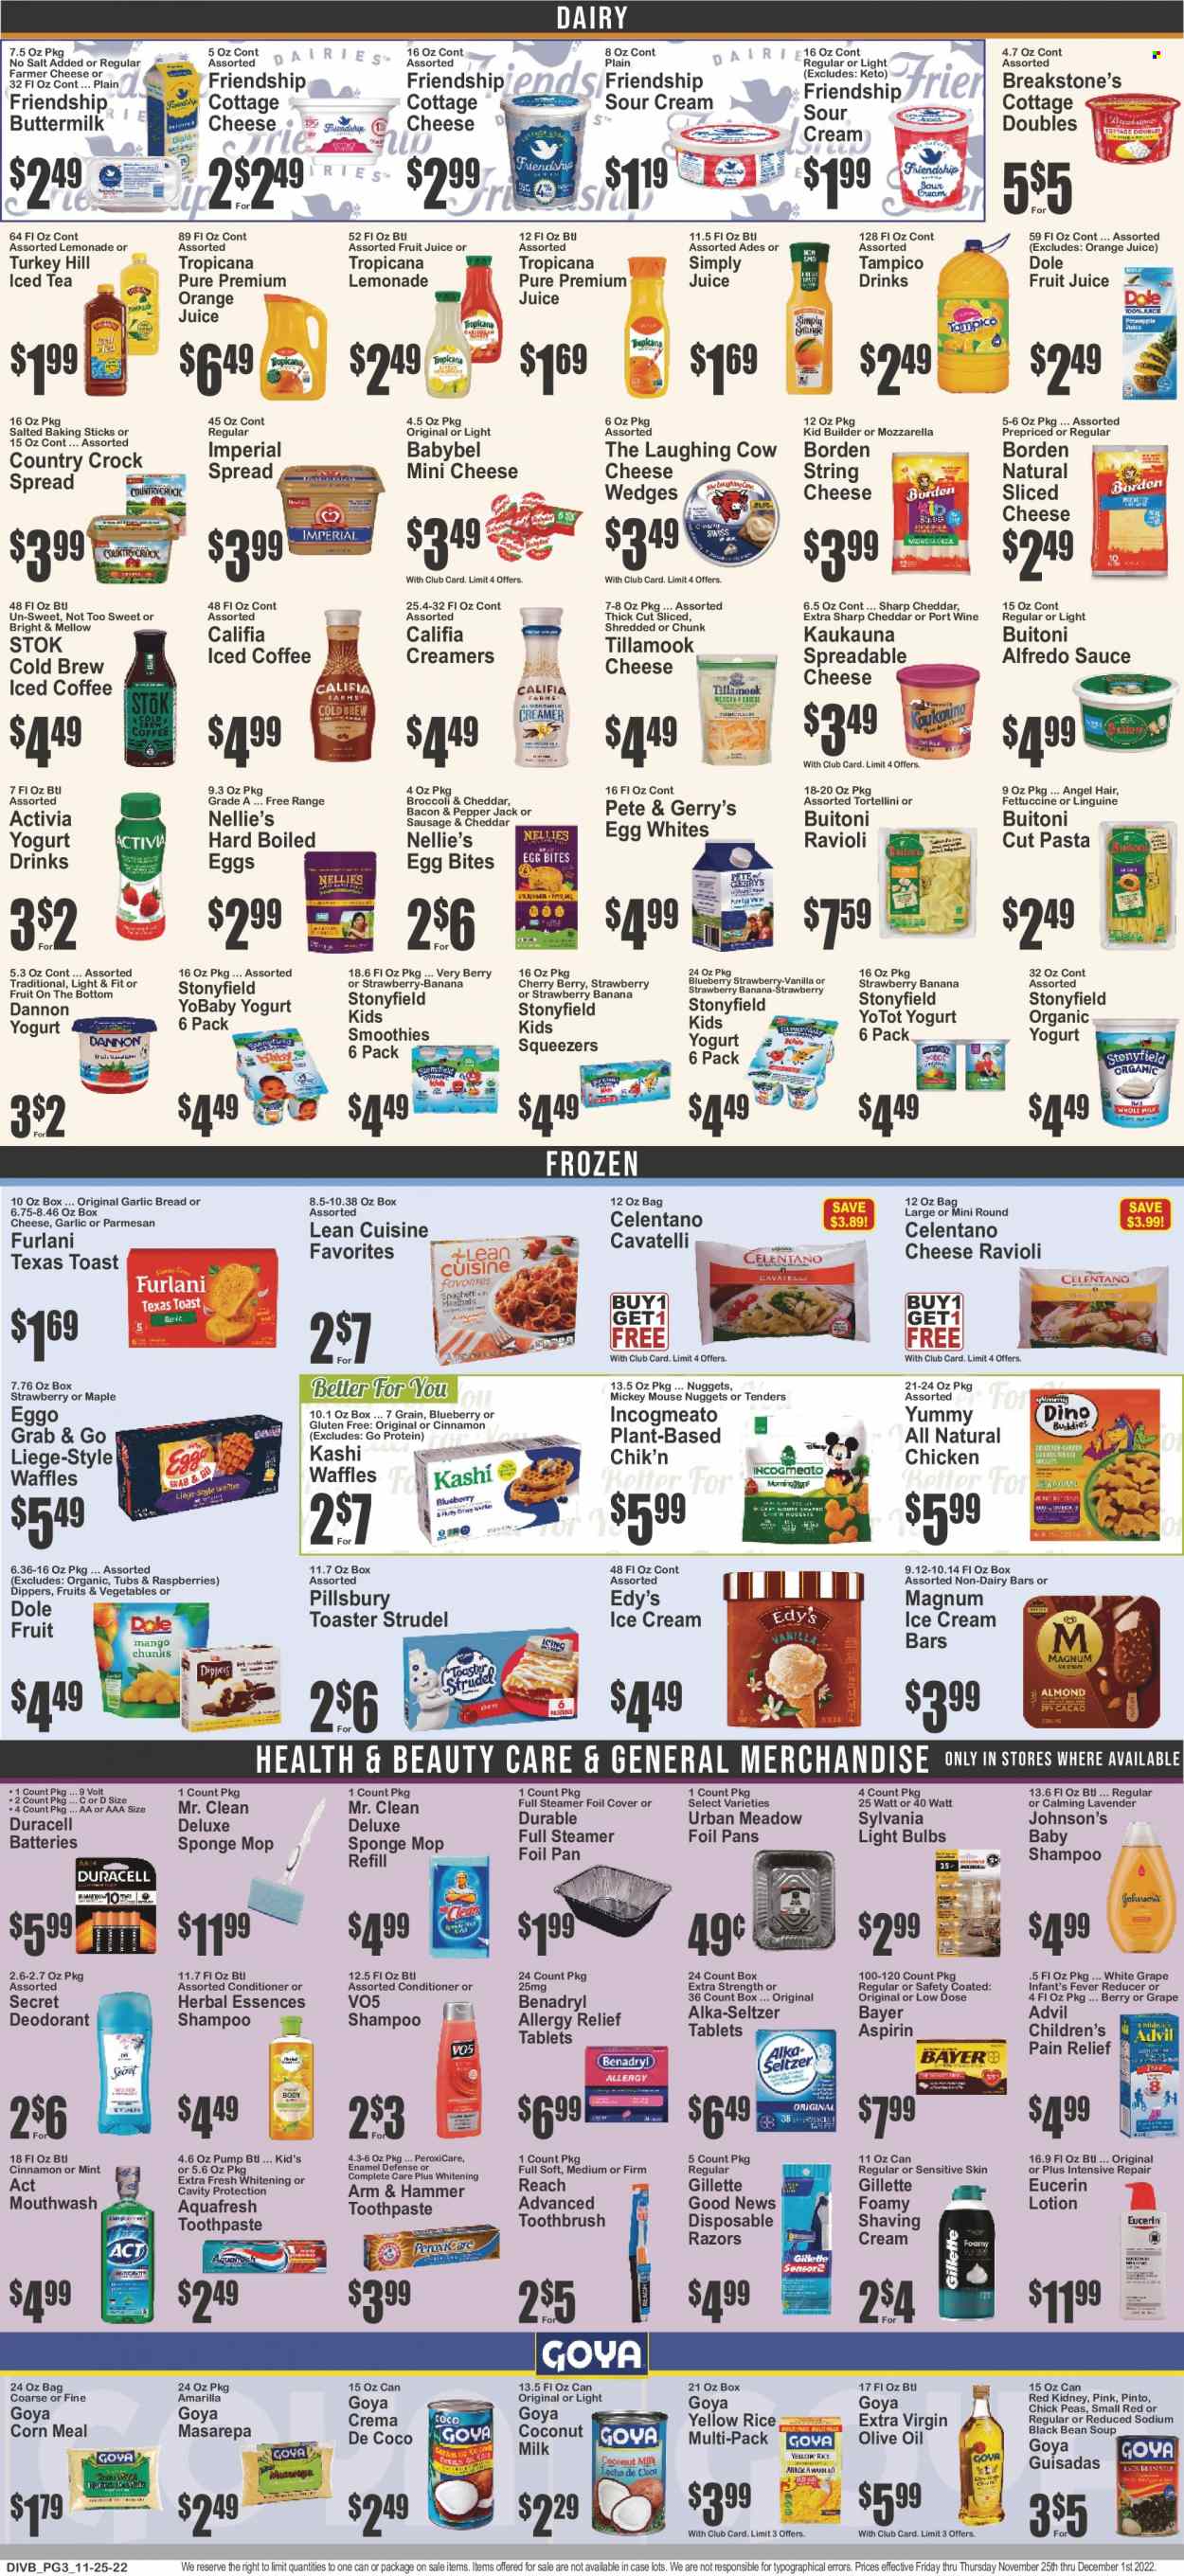 thumbnail - Super Fresh Flyer - 11/25/2022 - 12/01/2022 - Sales products - bread, strudel, waffles, broccoli, corn, Dole, cherries, ravioli, soup, nuggets, pasta, sauce, tortellini, Pillsbury, Lean Cuisine, Alfredo sauce, Buitoni, bacon, sausage, cottage cheese, farmer cheese, mozzarella, sliced cheese, string cheese, parmesan, Pepper Jack cheese, The Laughing Cow, Babybel, yoghurt, organic yoghurt, Activia, Dannon, buttermilk, yoghurt drink, eggs, sour cream, ice cream, ice cream bars, Mickey Mouse, ARM & HAMMER, coconut milk, Goya, rice, cinnamon, extra virgin olive oil, olive oil, oil, lemonade, orange juice, juice, fruit juice, ice tea, fruit punch, smoothie, iced coffee, port wine, Johnson's, shampoo, toothbrush, toothpaste, mouthwash, conditioner, Herbal Essences, VO5, body lotion, Eucerin, anti-perspirant, deodorant, Gillette, disposable razor, mop pad, battery, bulb, Duracell, light bulb, Sylvania. Page 3.